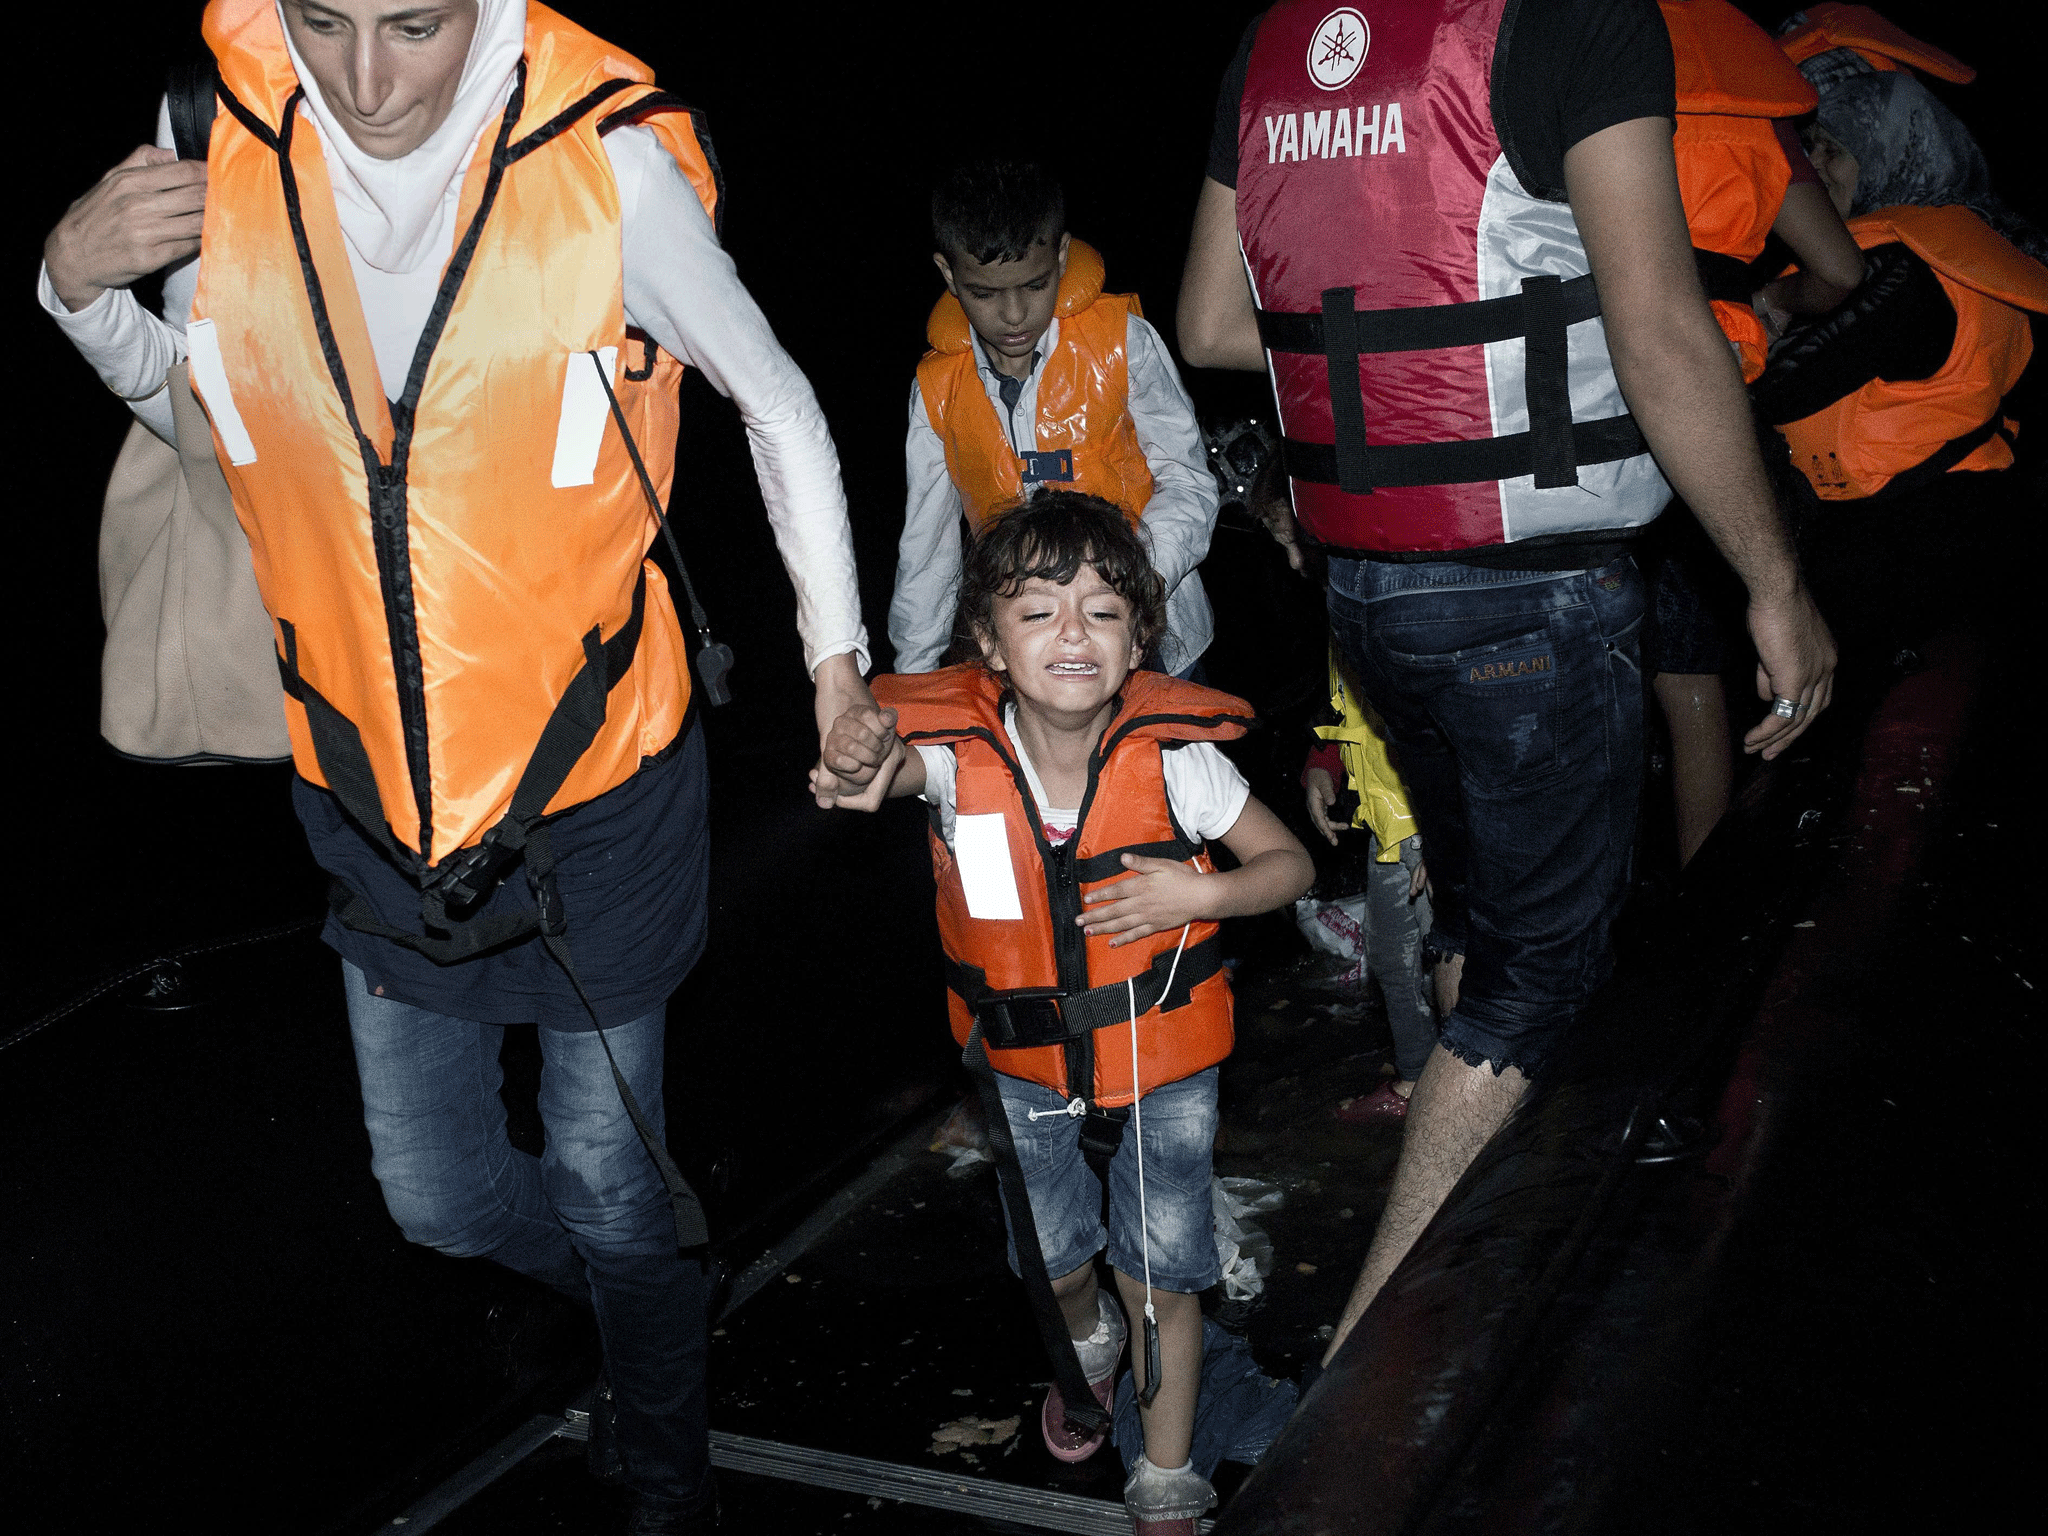 A young girl gets out of an inflatable boat while migrants arrive on a beach on the Greek island of Kos, after crossing a part of the Aegean Sea between Turkey and Greece, on August 12, 2015